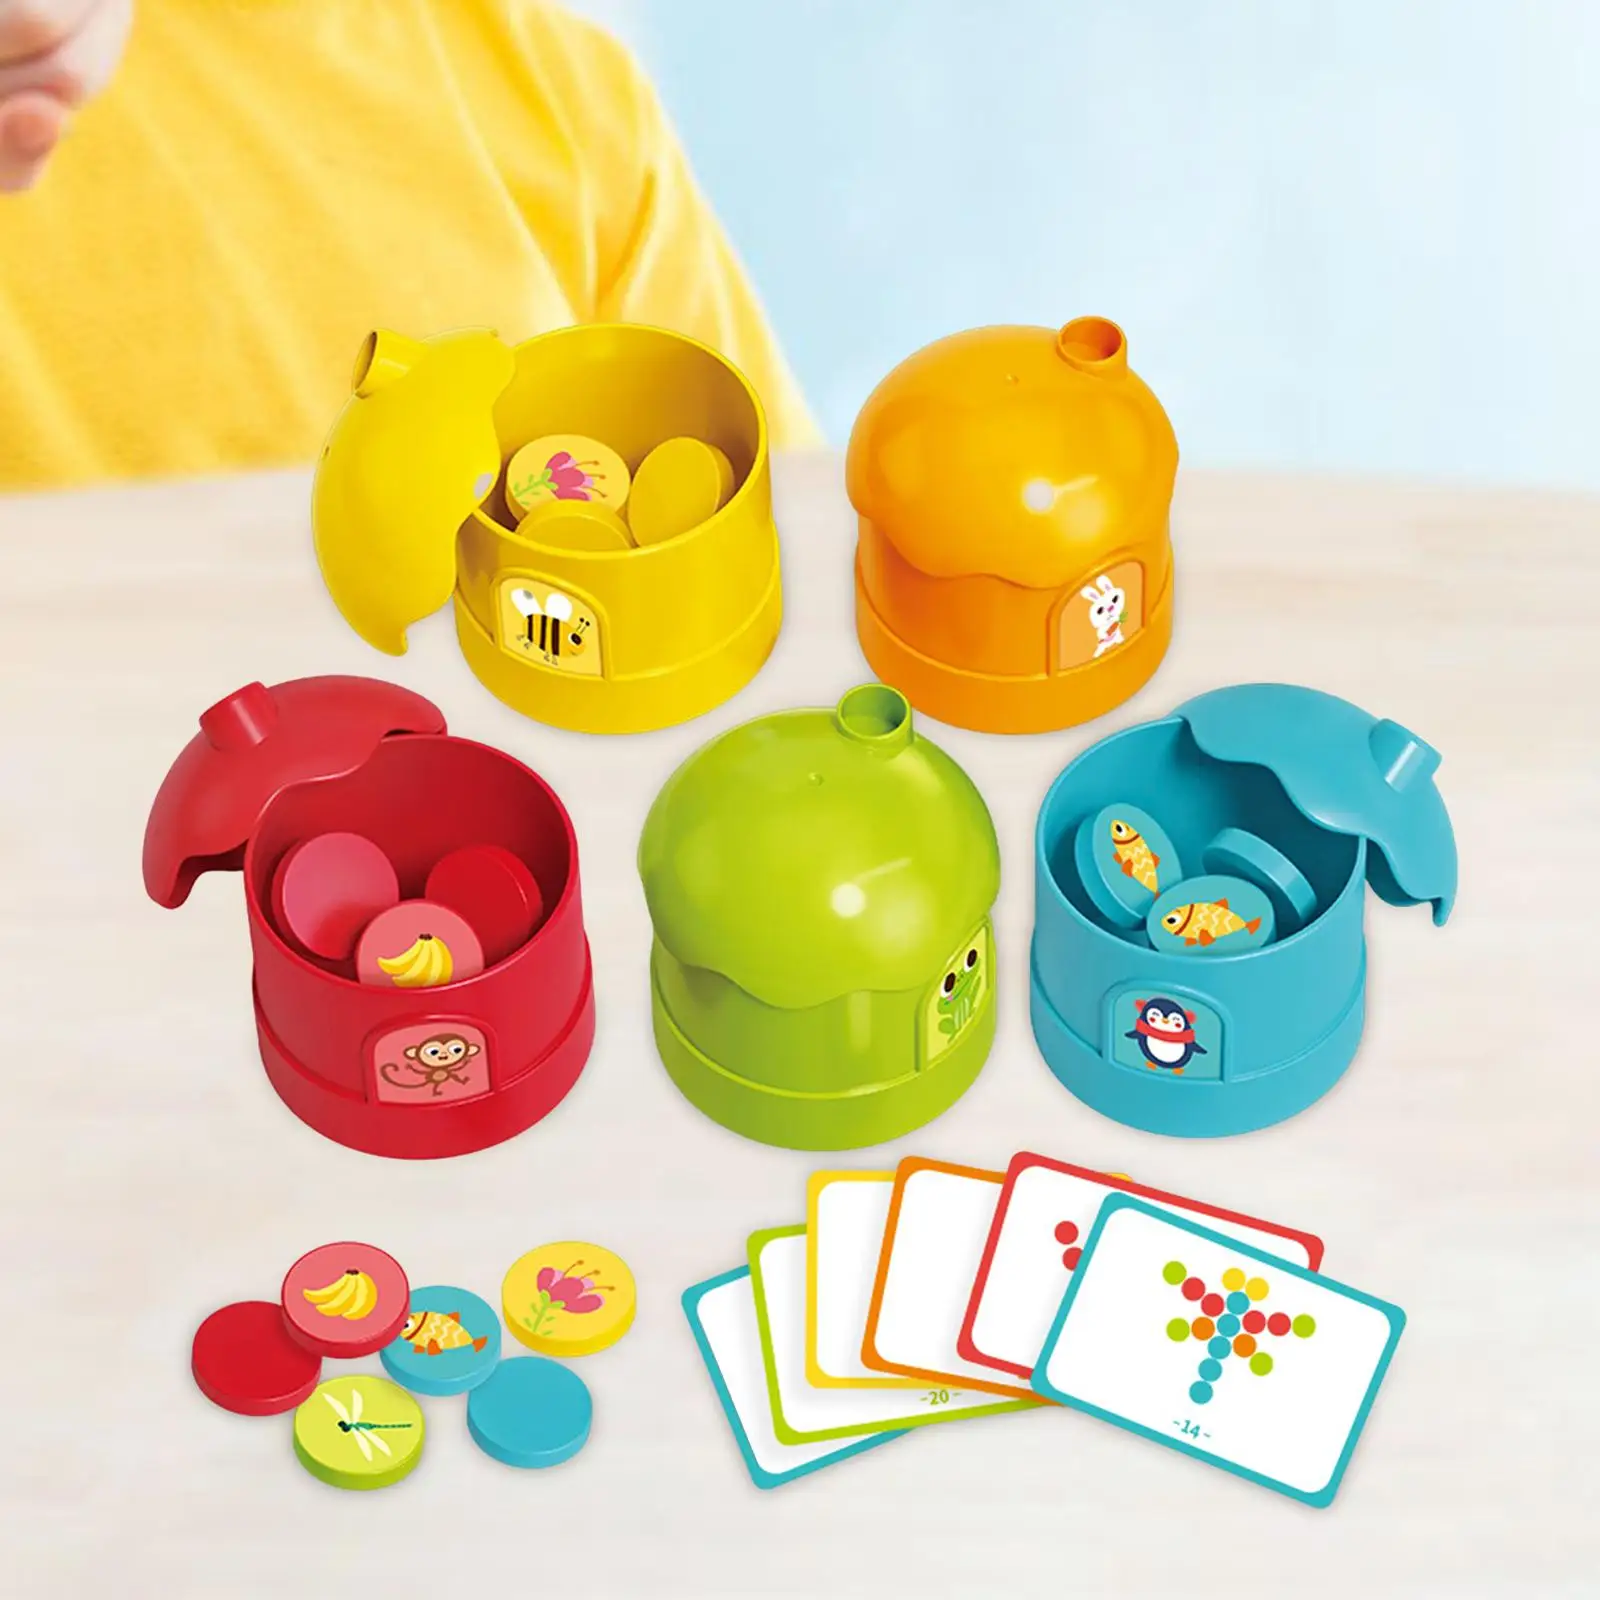 Sorting Cup Practical Math Teaching Aids Matching Game Birthday Gift for Activities